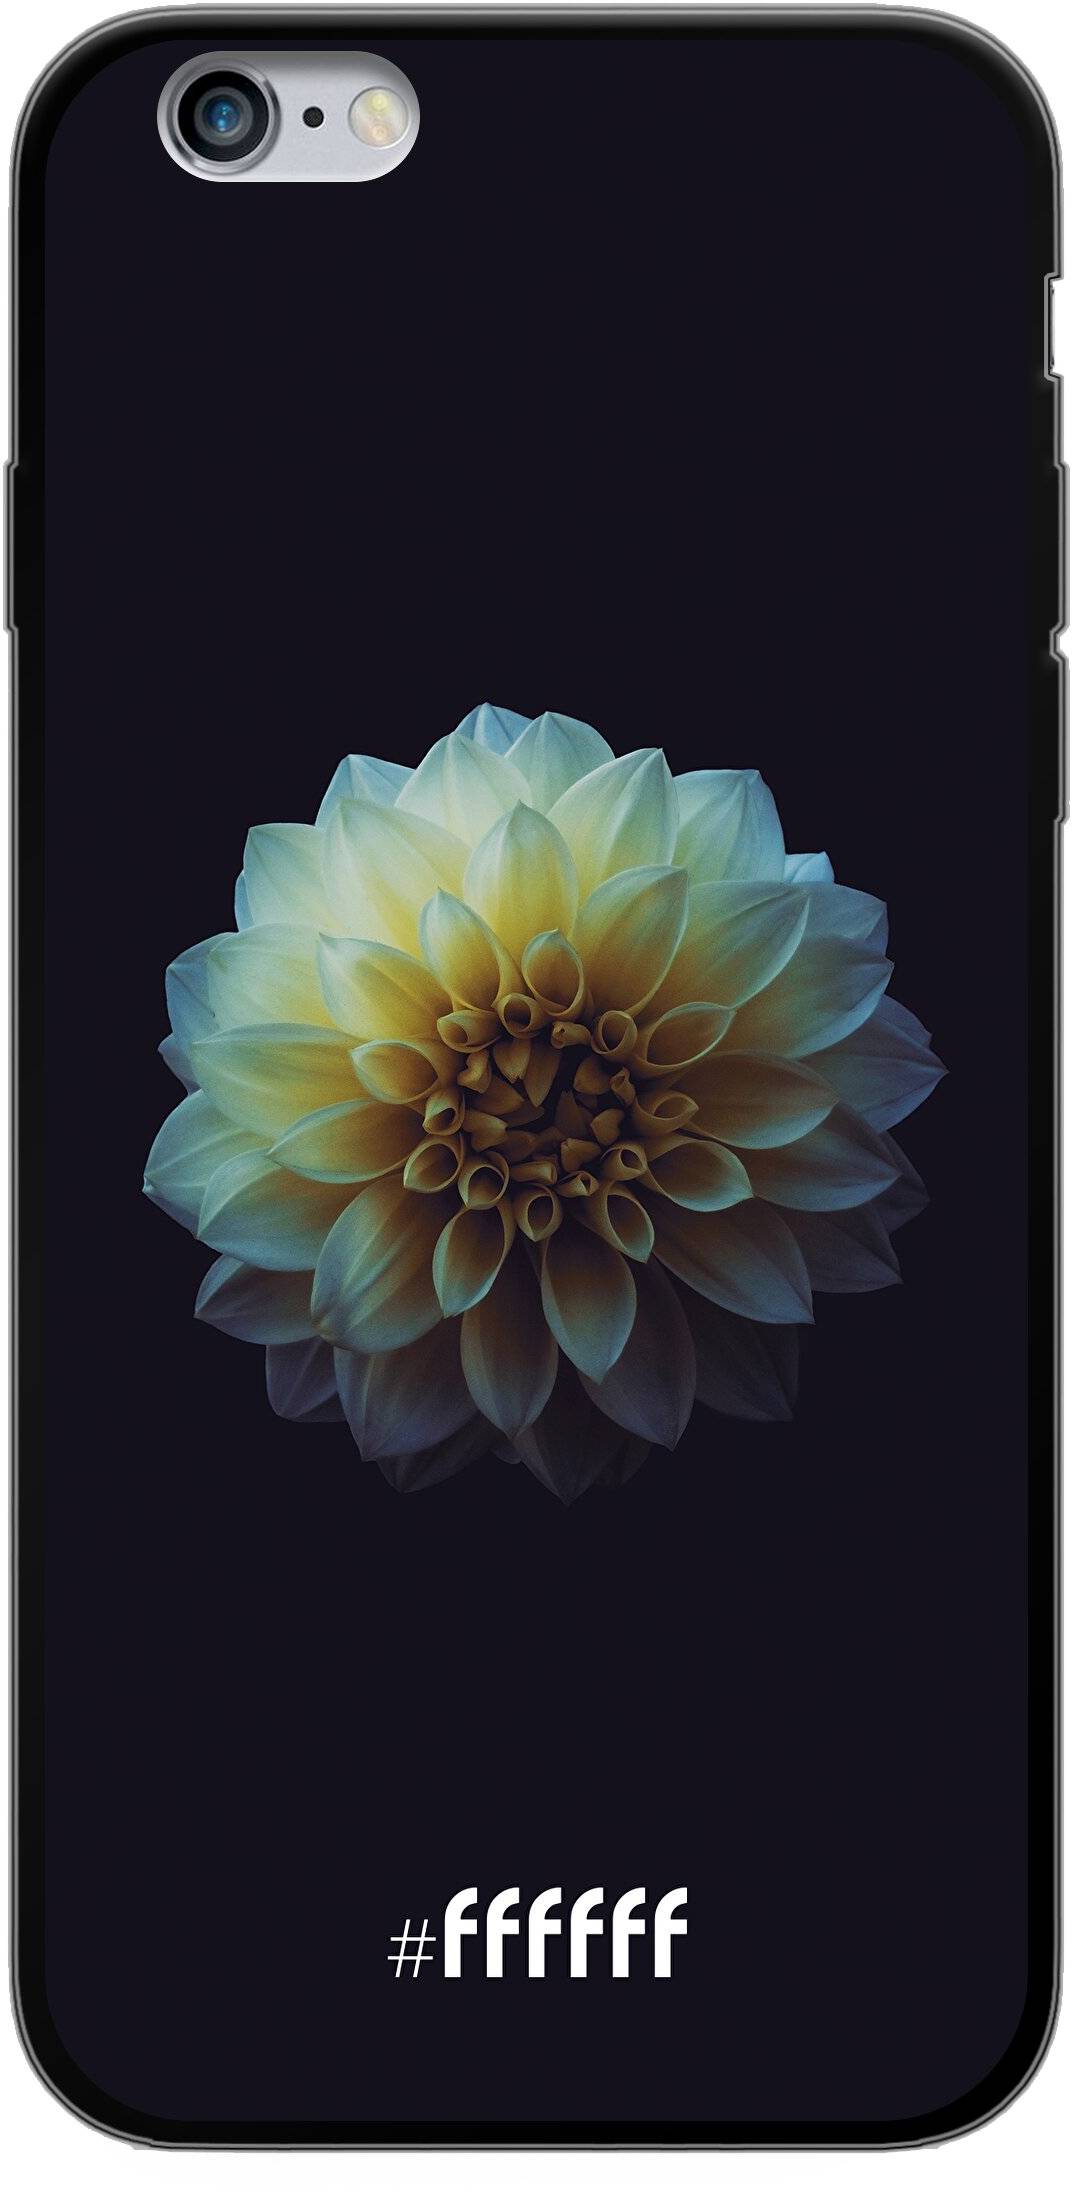 Just a Perfect Flower iPhone 6